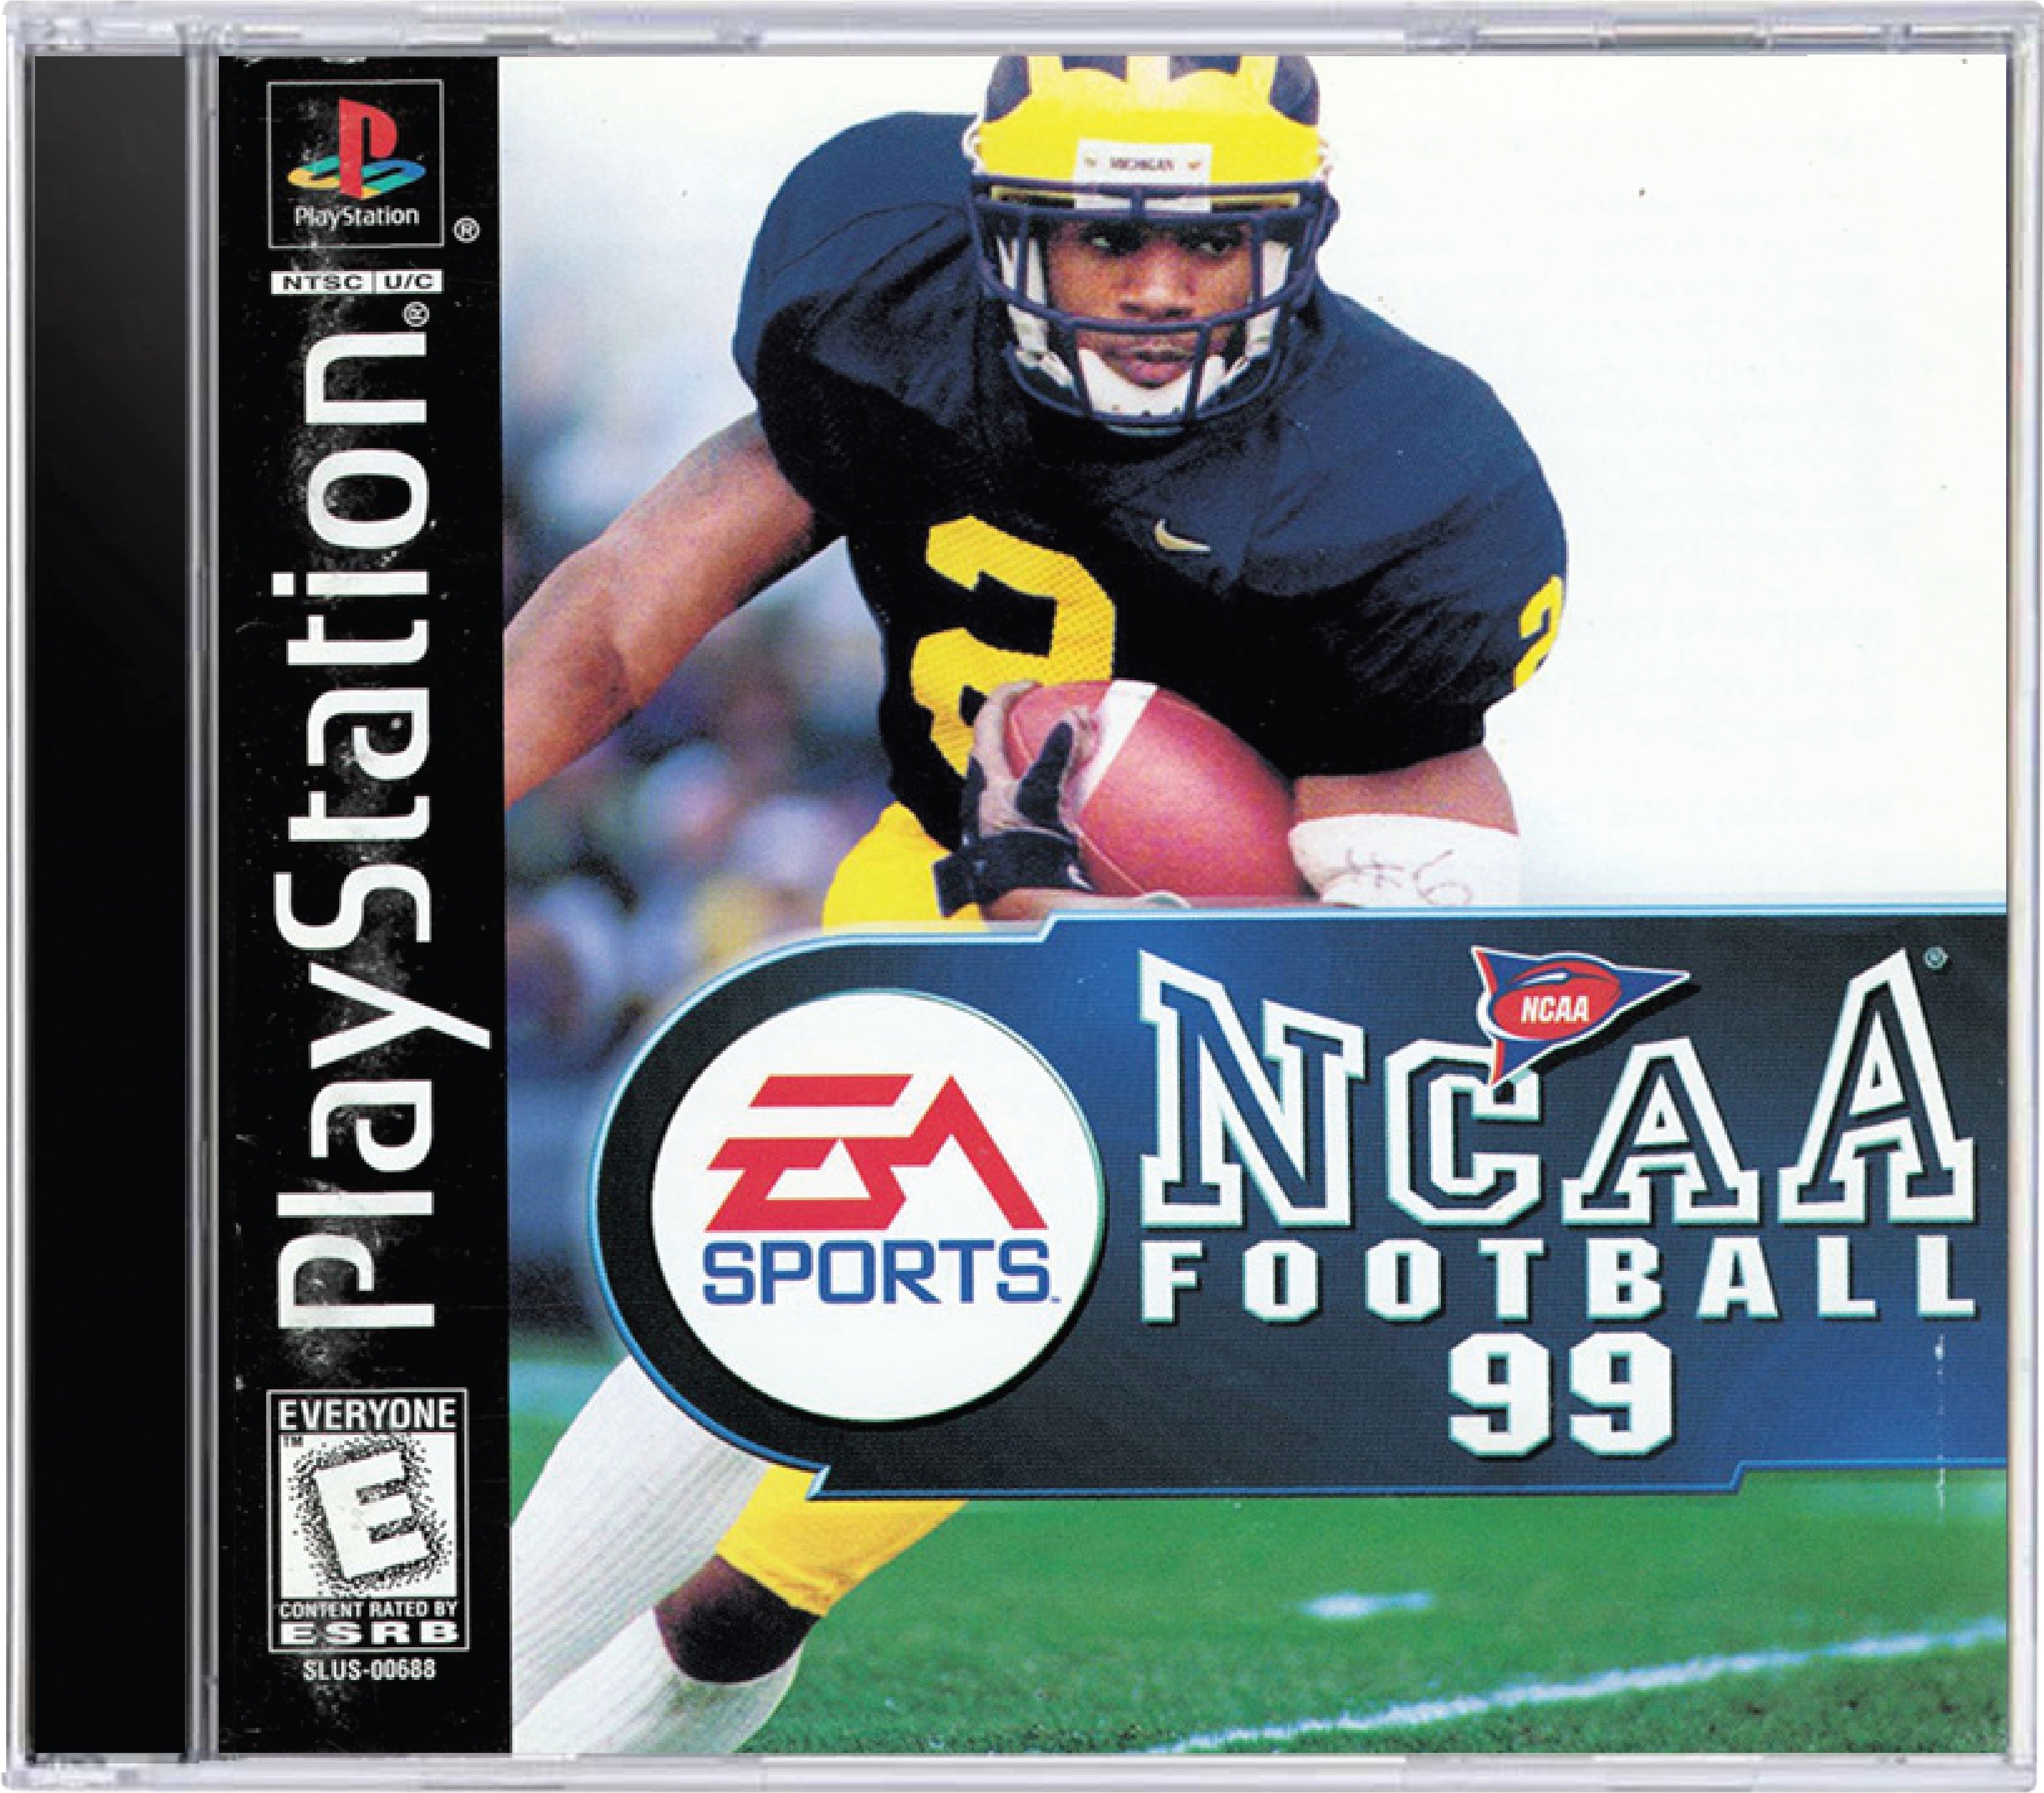 NCAA Football 99 Cover Art and Product Photo